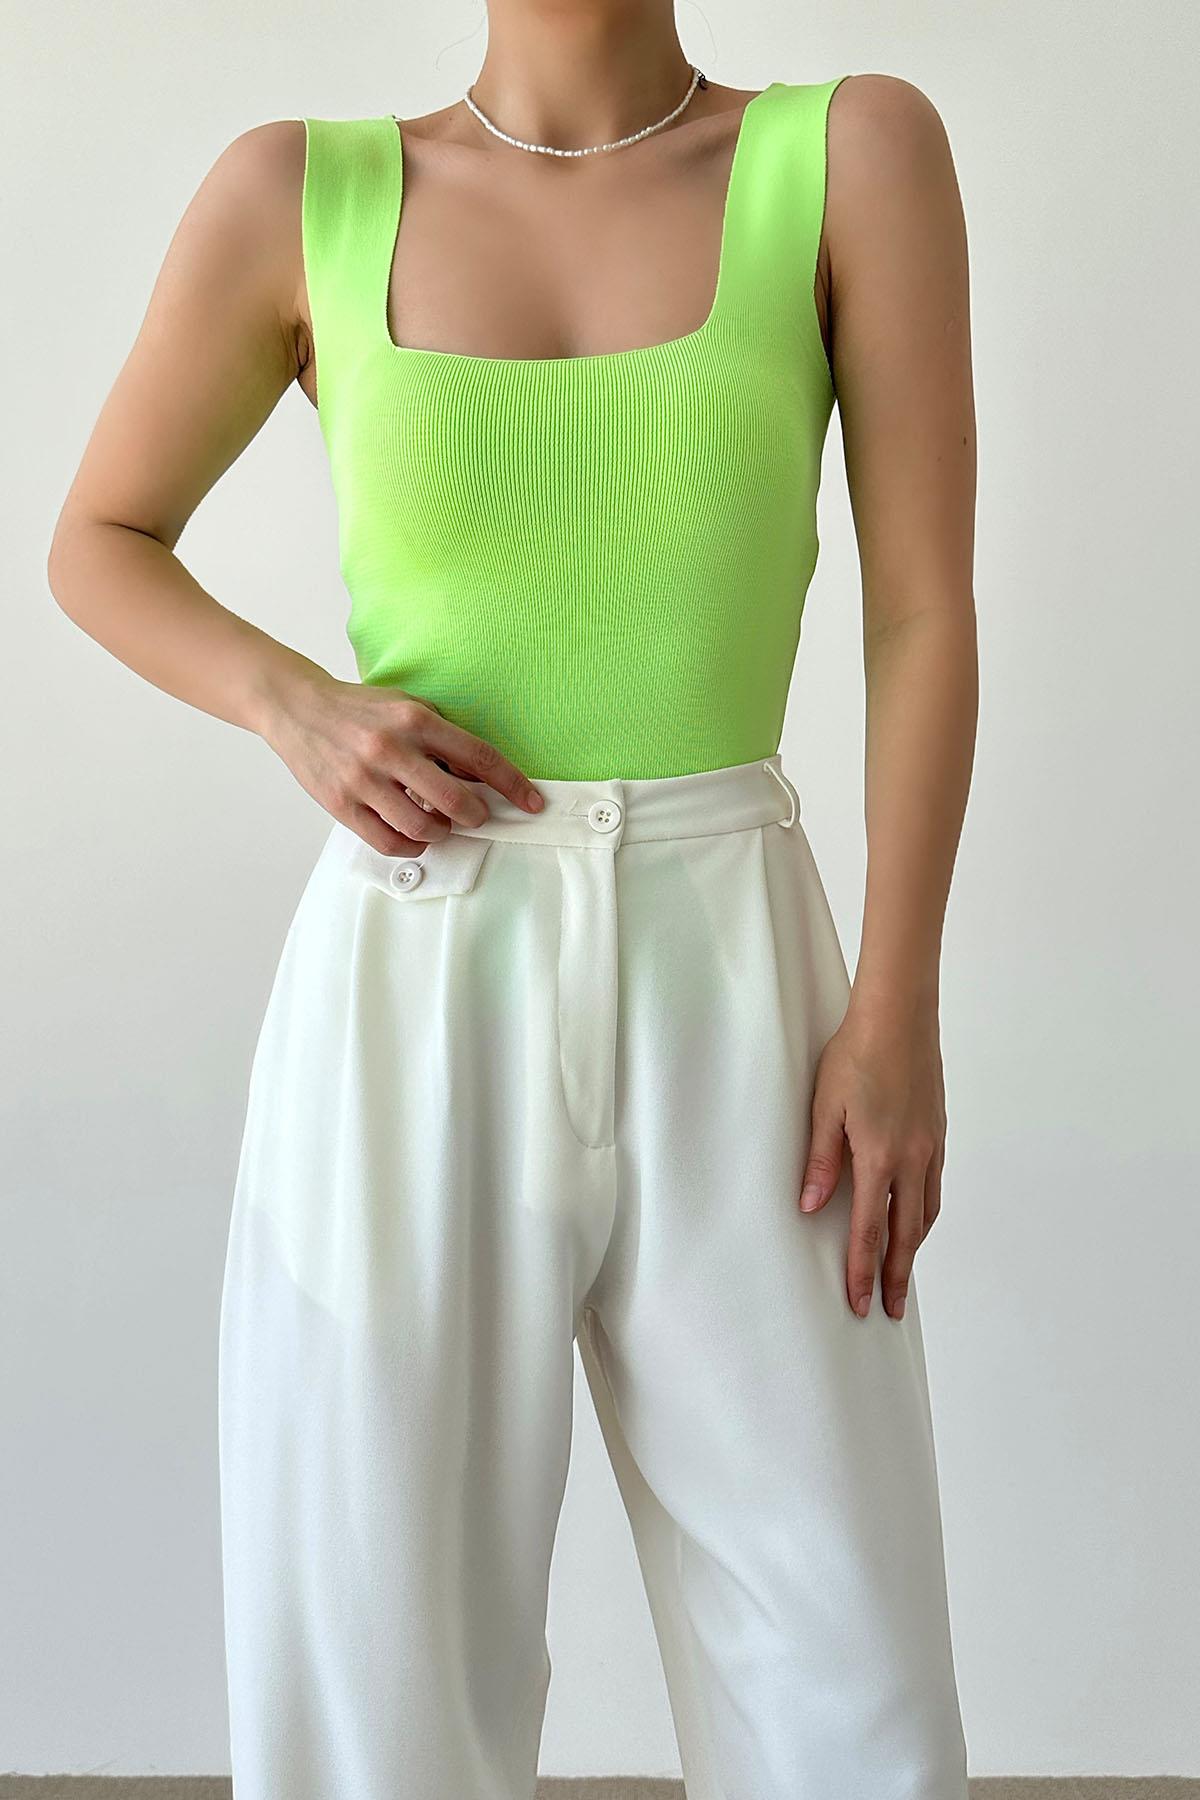 A wholesale clothing model wears Tall Tank Top - Lime Green, Turkish wholesale Undershirt of Qustyle